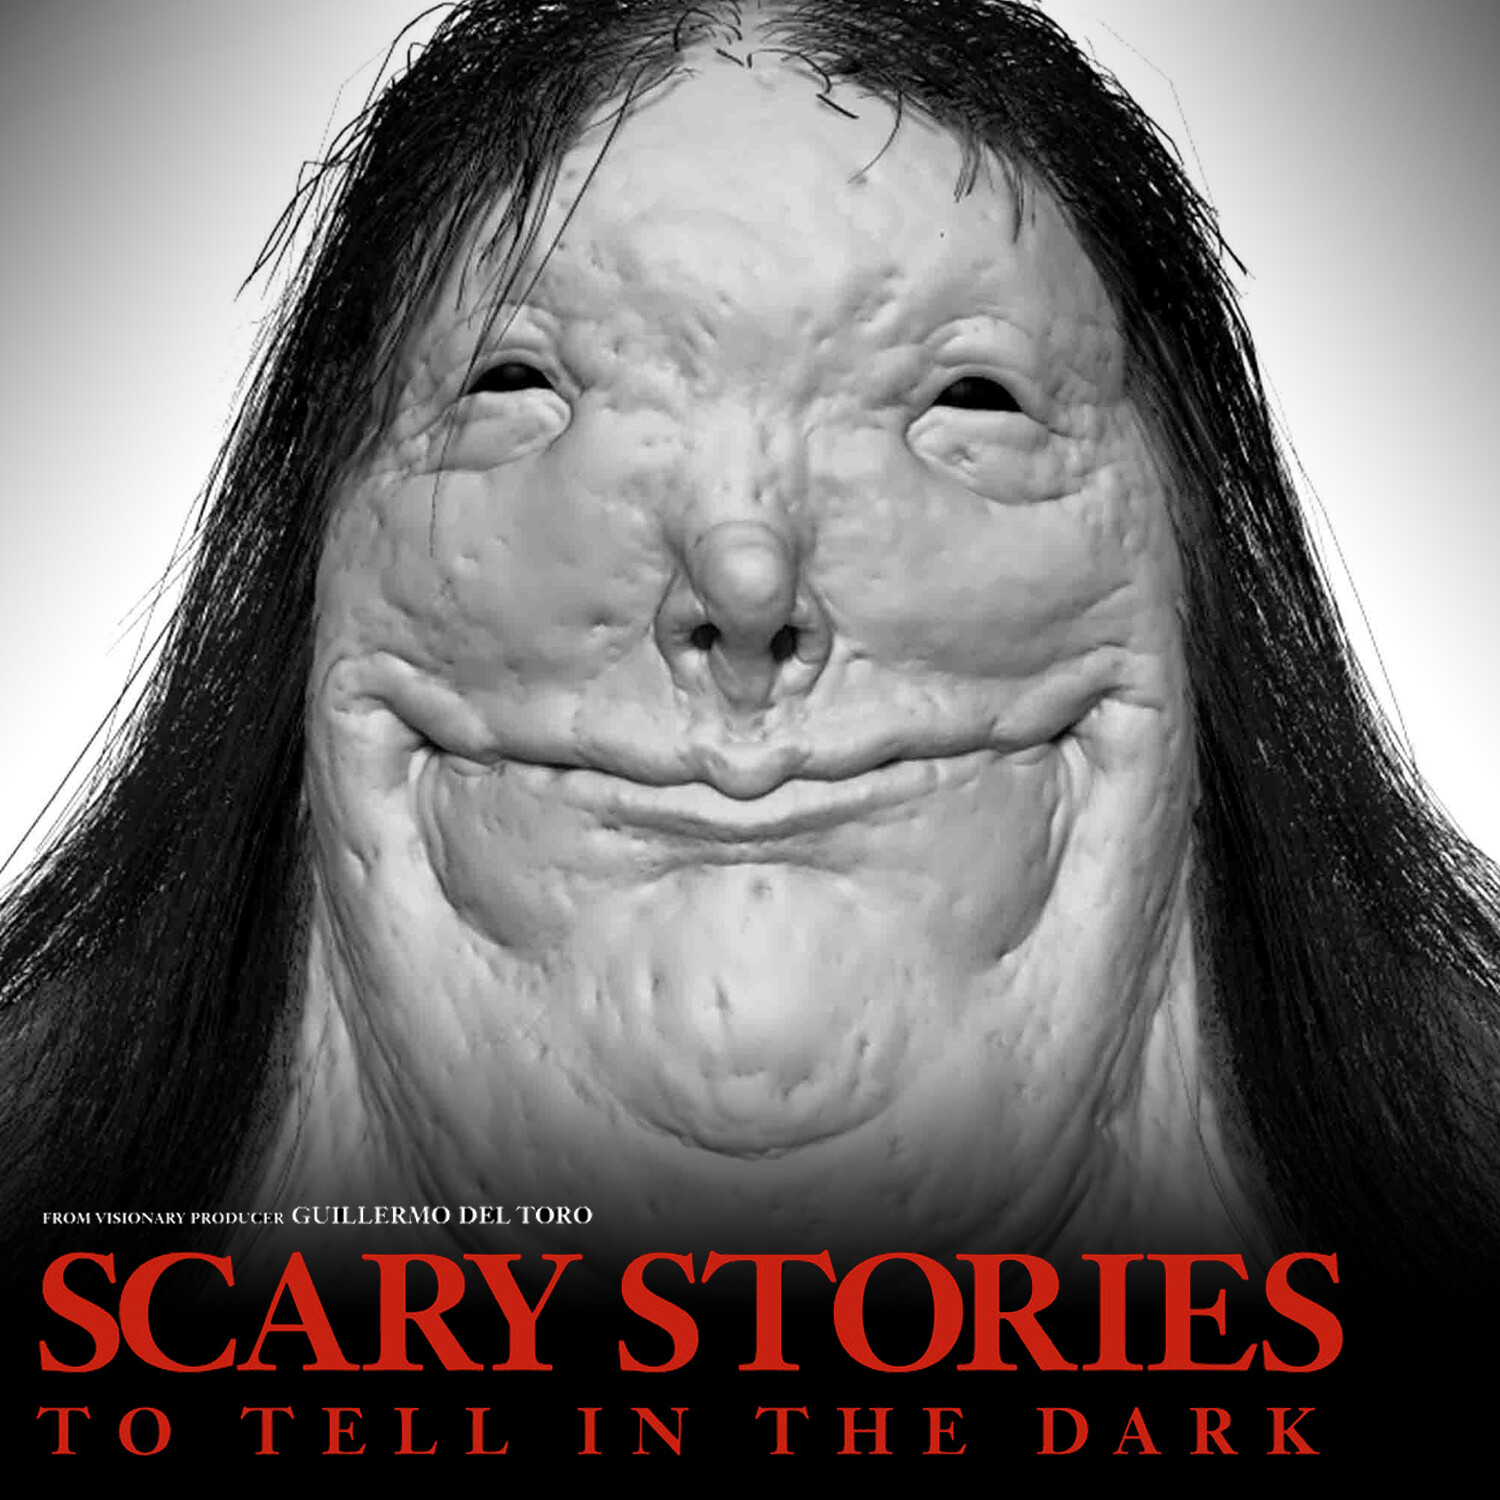 Creature from Scary Stories Book Totally Looks Like Poker Face